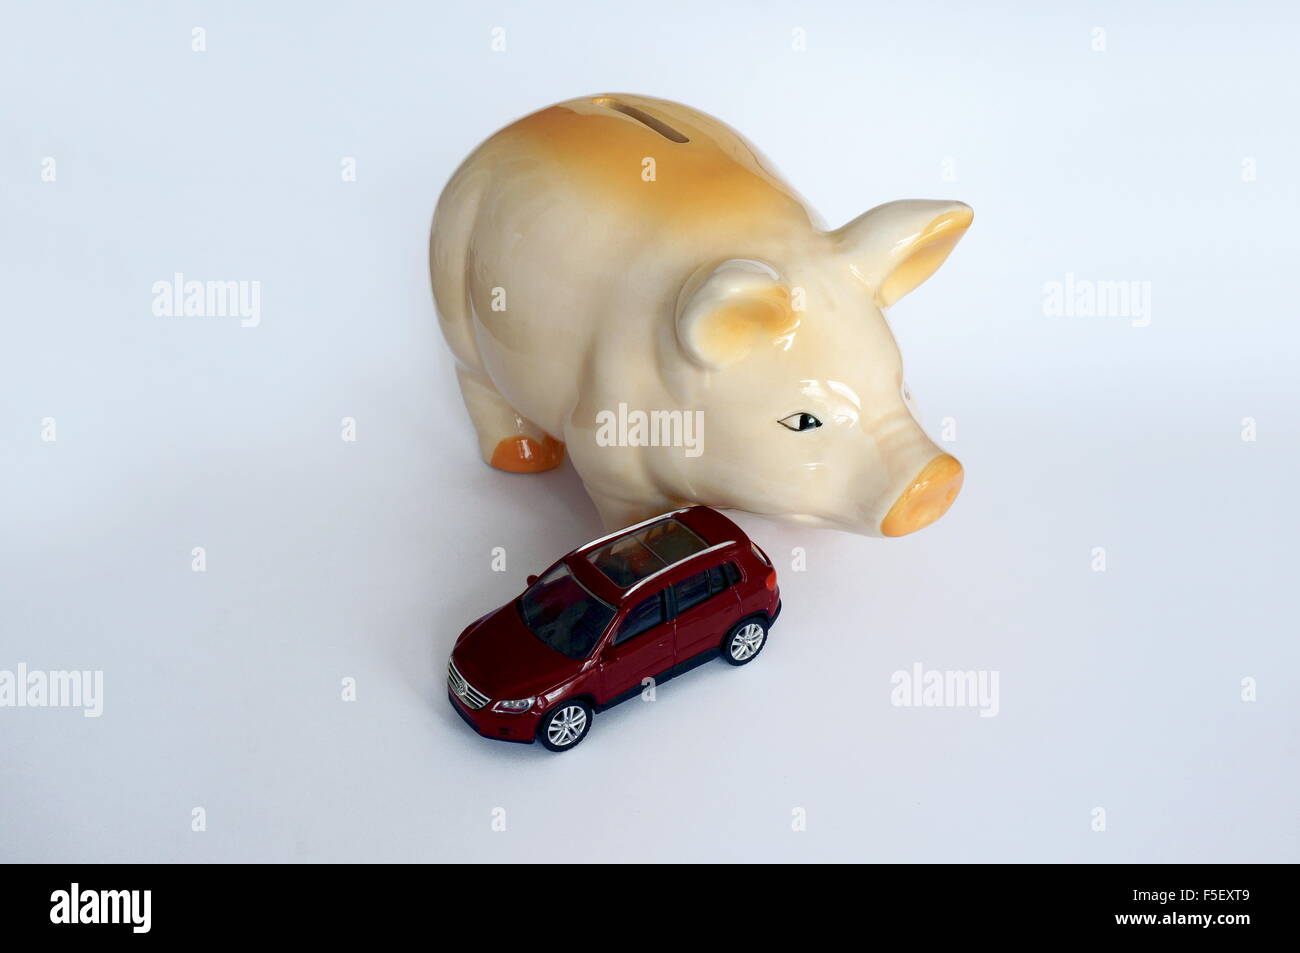 ILLUSTRATION - A Volkswagen car model 'VW Tiguan' next to a piggy bank . The photo was taken on 16 October 2015. Photo: S. Steinach - NO WIRE SERVICE - Stock Photo